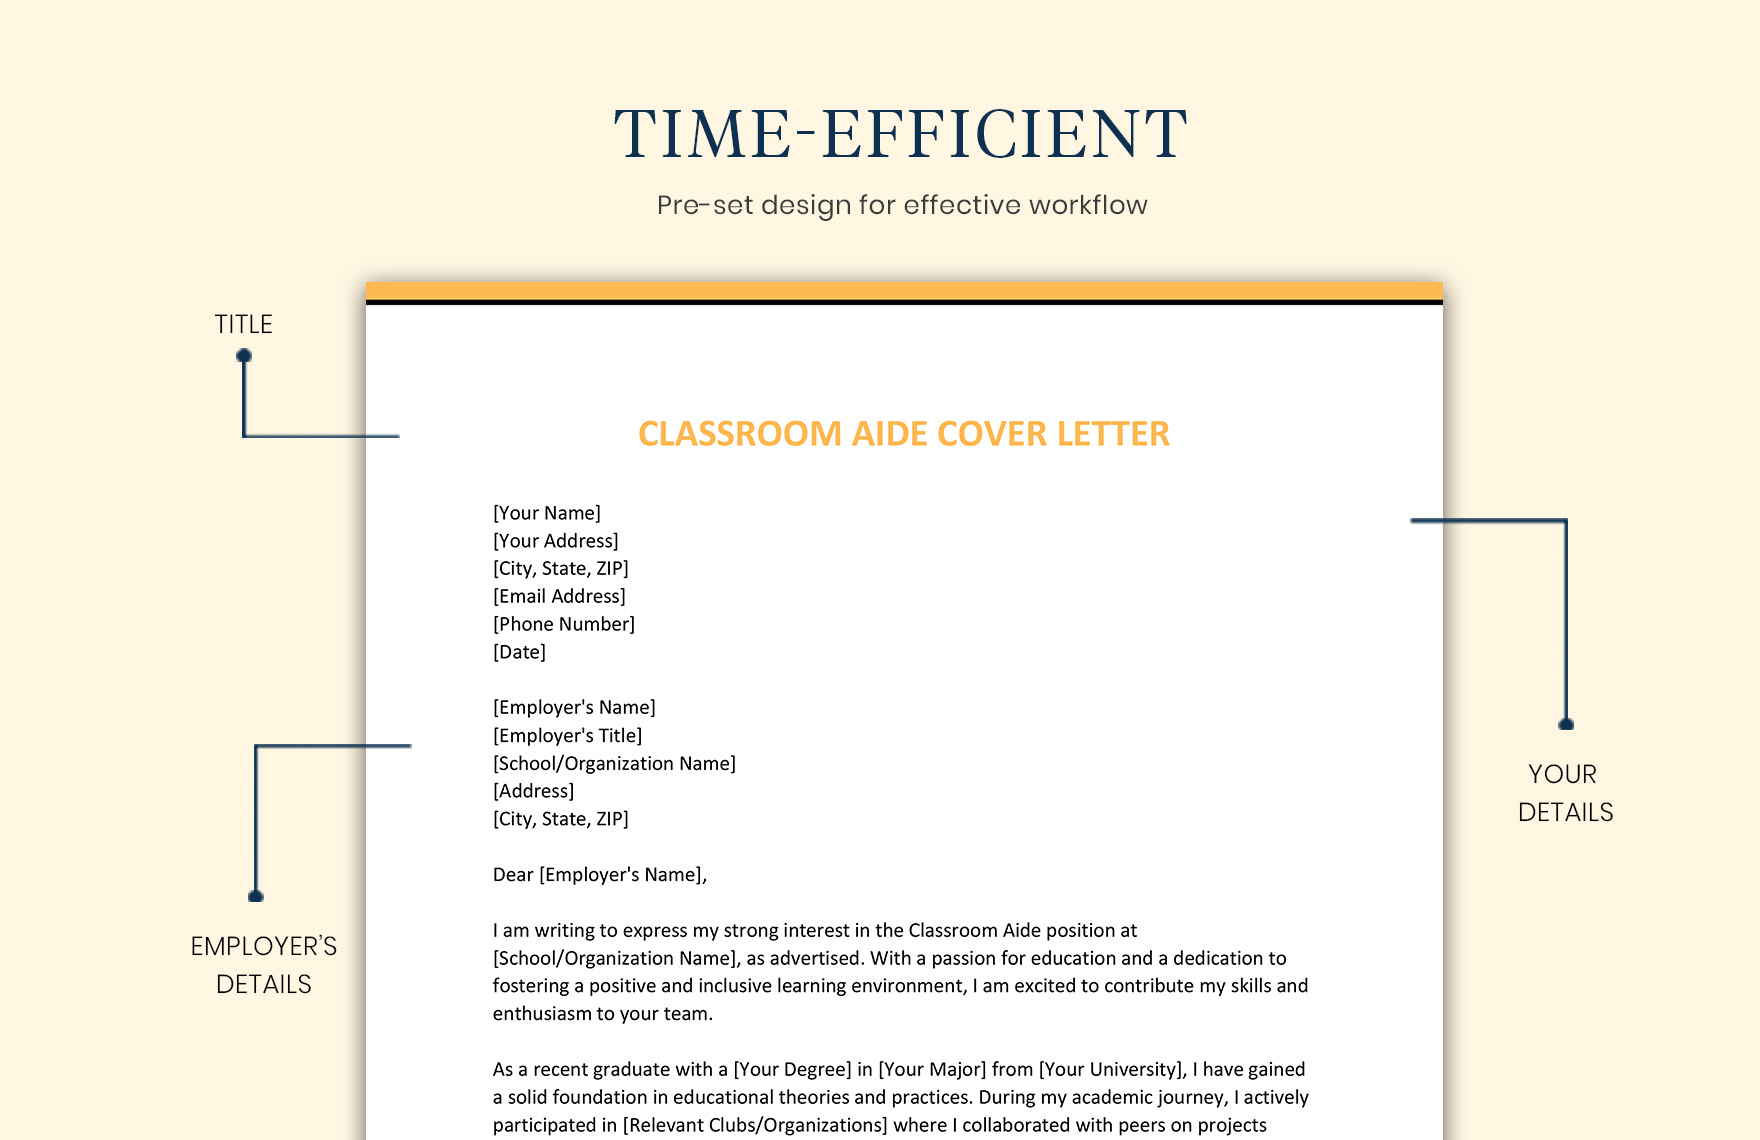 Classroom Aide Cover Letter